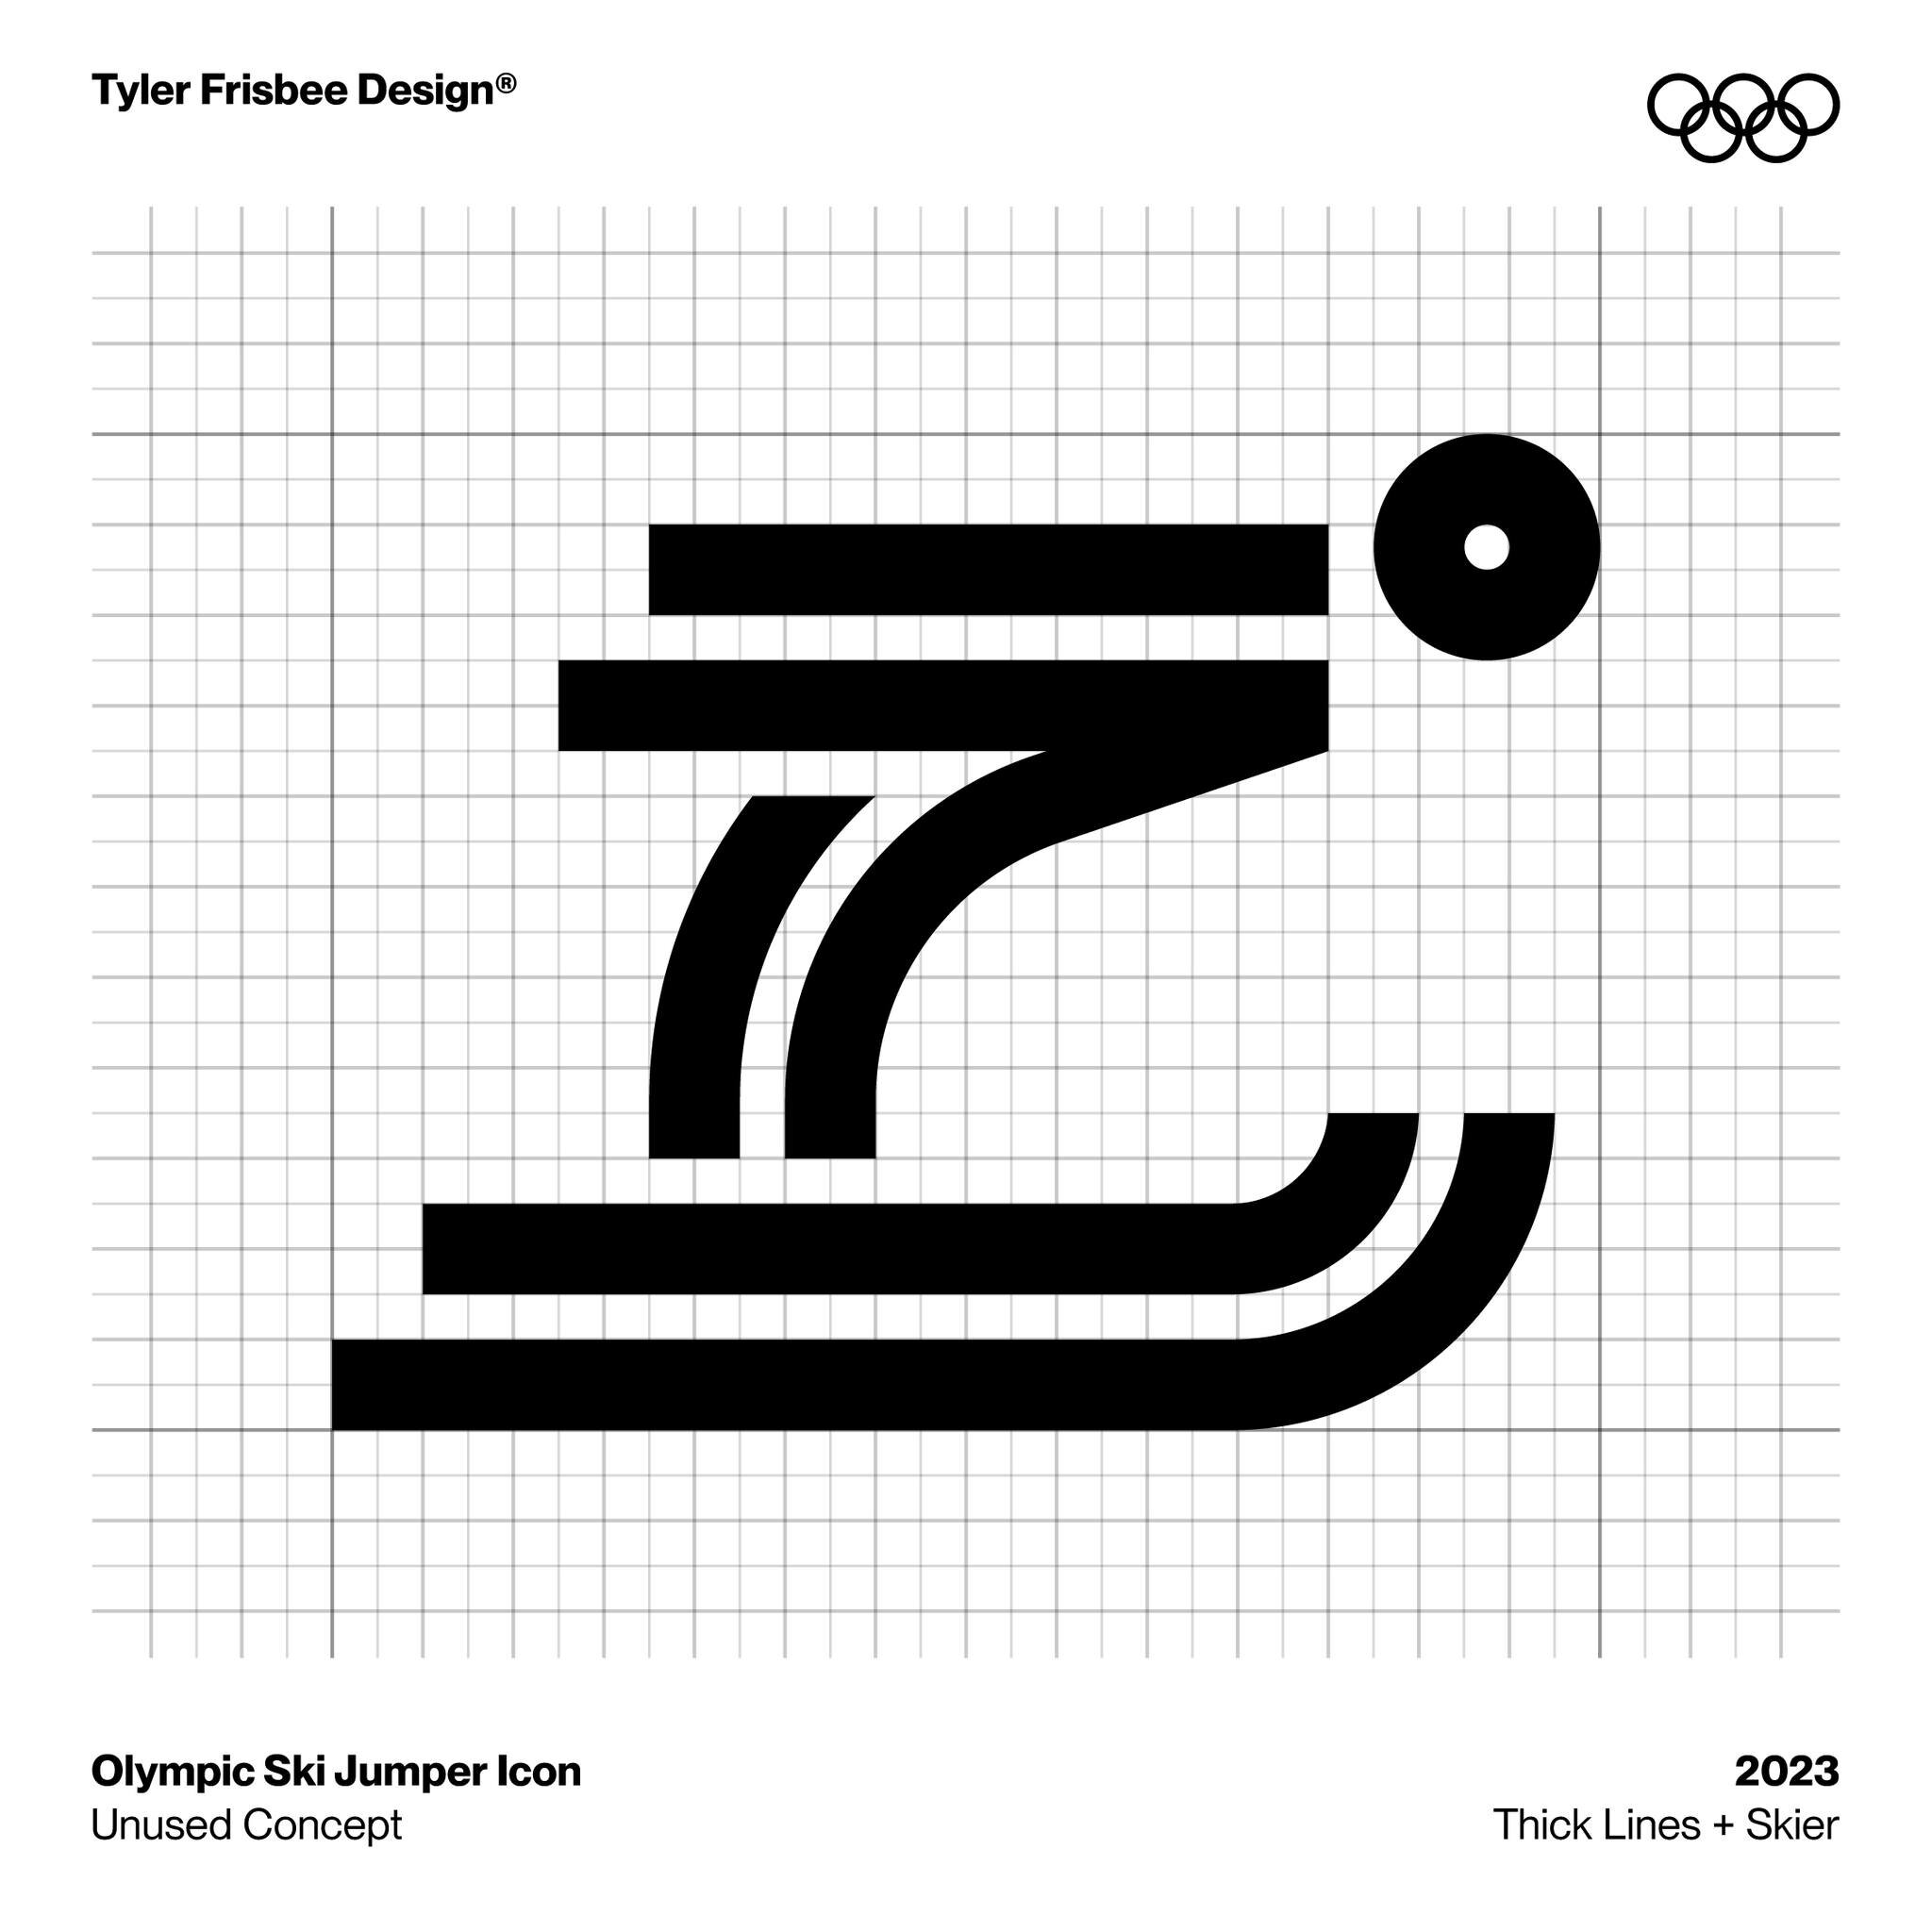 Earlier this year I got to throw in on a very cool Olympics-related project. Though it never saw the light of day, I still love this ski jumper design that came out of some early icon exploration. ⁣
⁣
⁣⁣⁣⁣⁣
⁣⁣⁣⁣⁣
⁣⁣⁣⁣⁣
⁣⁣⁣⁣⁣
.⁣⁣⁣⁣⁣
.⁣⁣⁣⁣⁣
.⁣⁣⁣⁣⁣
.⁣⁣⁣